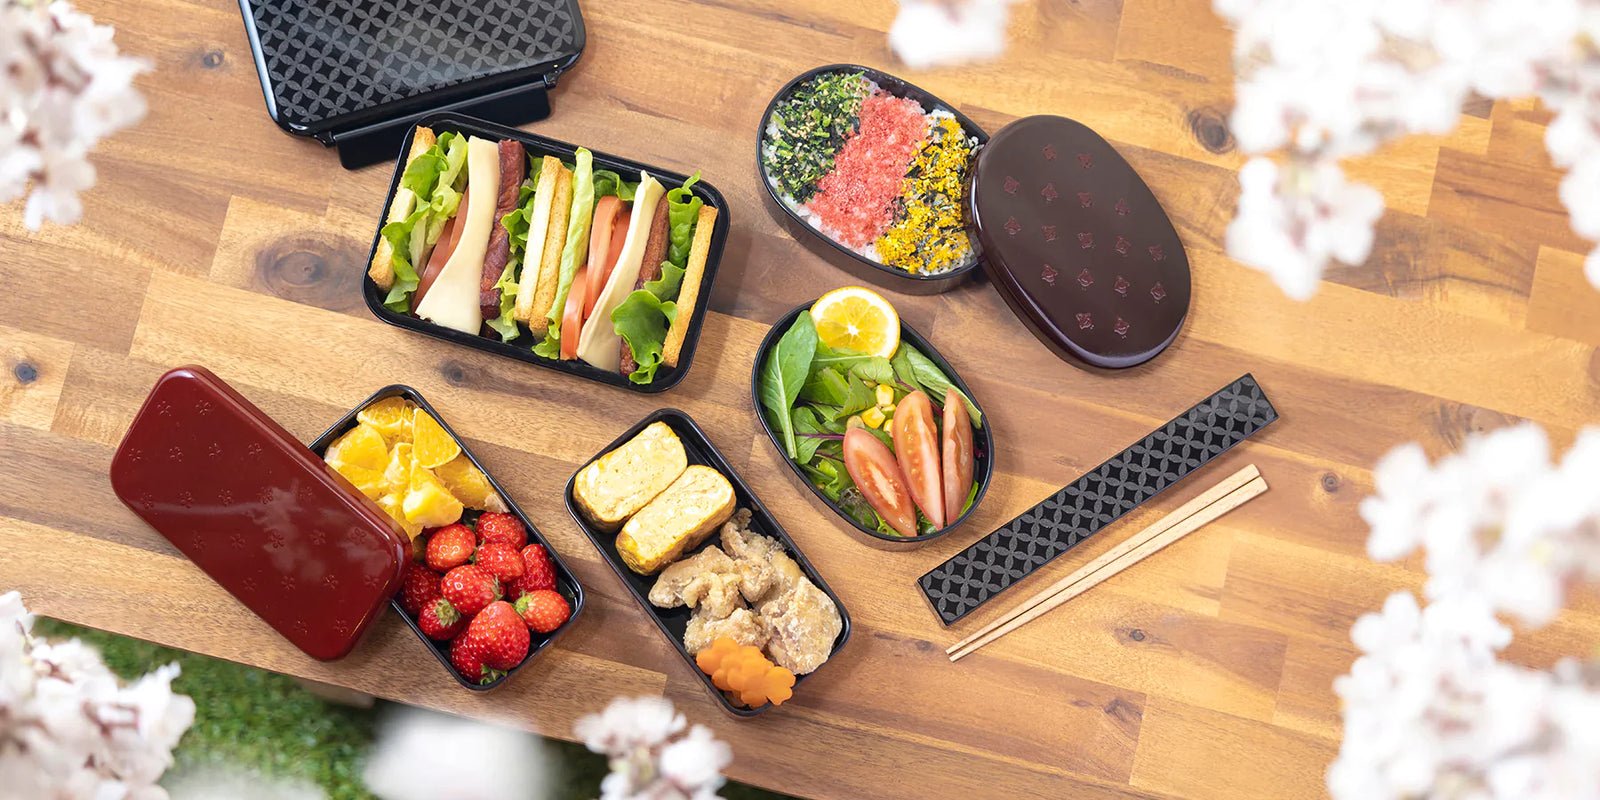 Choosing a Japanese Bento Box: All You Need to Know